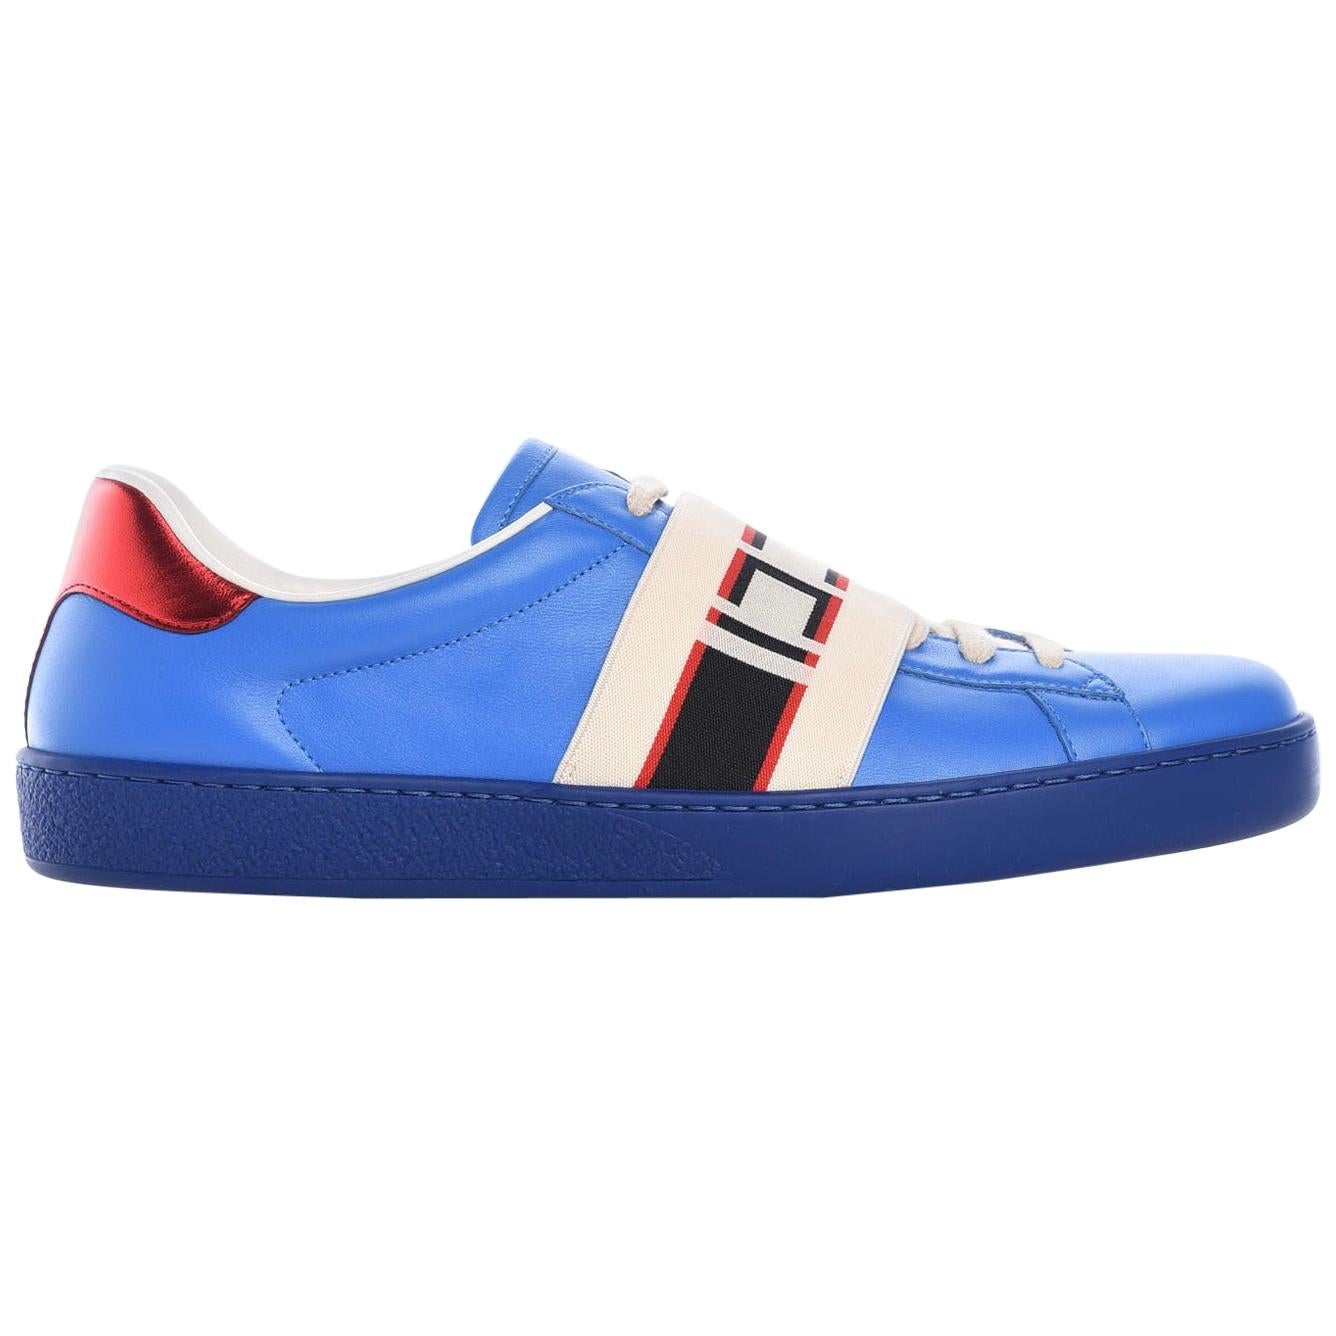 Gucci Mens Blue Red Stripe Lace Up Sneakers (10 US)